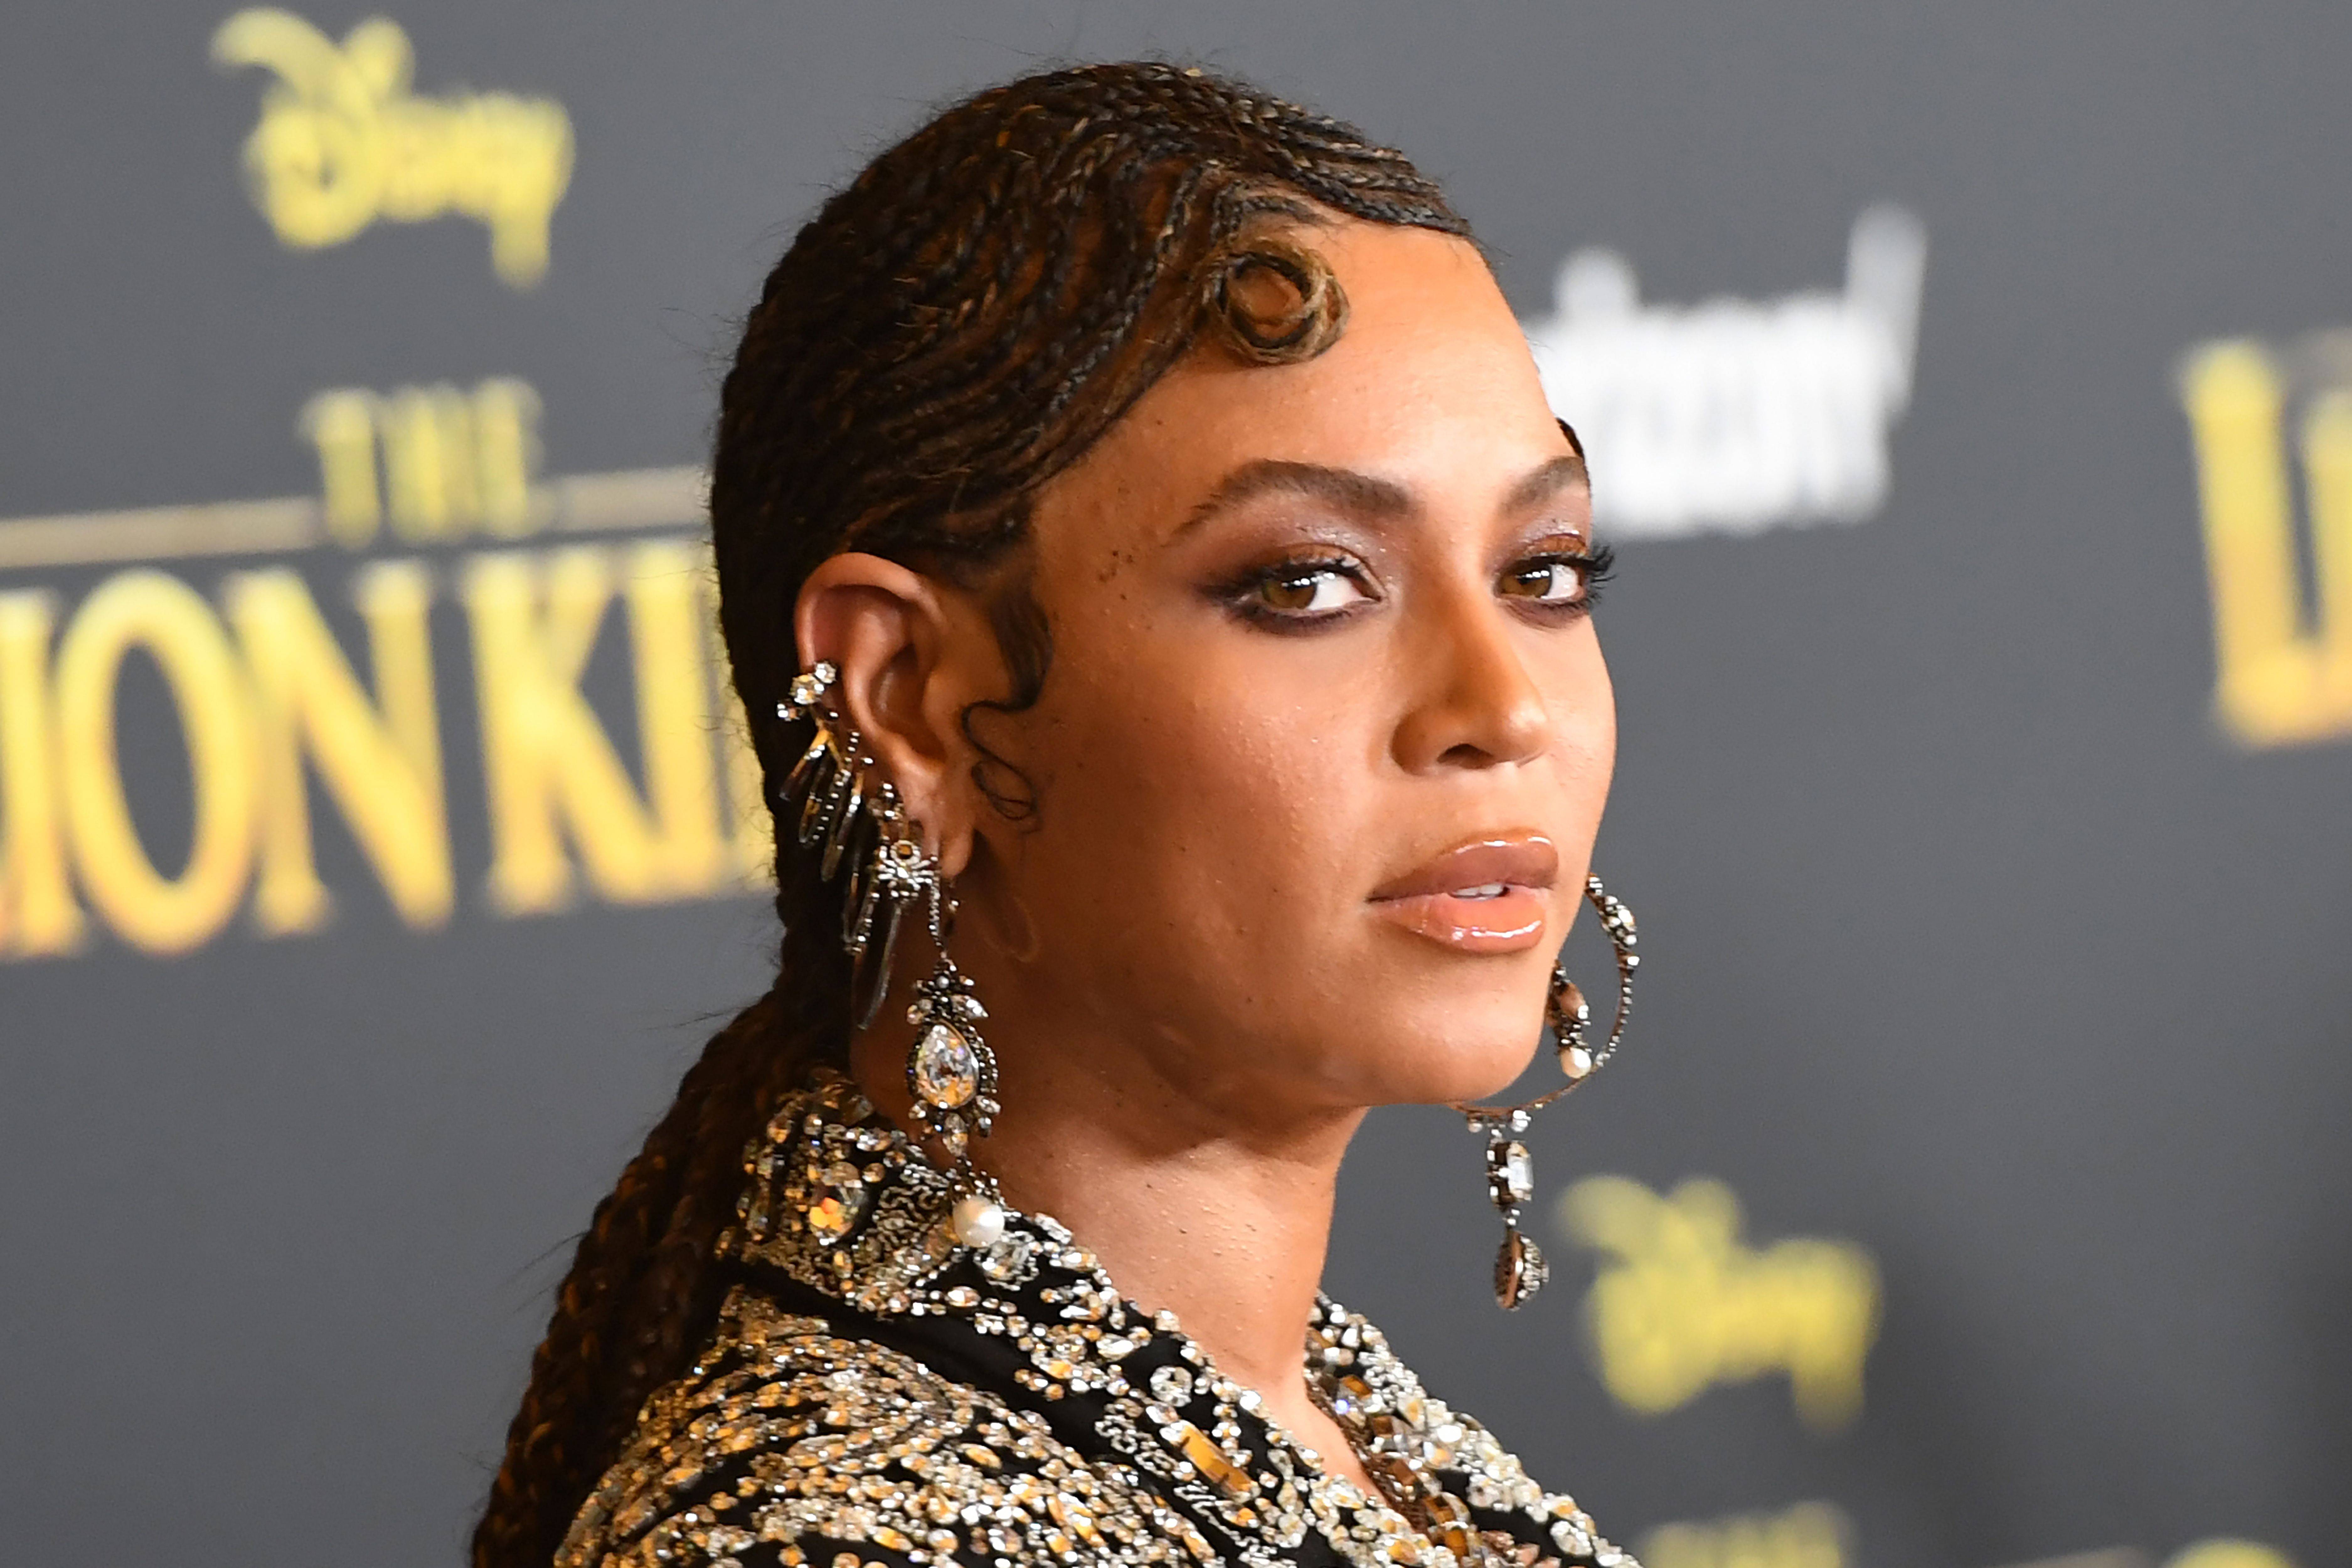 US singer/songwriter Beyonce arrives for the world premiere of Disney's "The Lion King" at the Dolby theatre on July 9, 2019 in Hollywood. (Photo by Robyn Beck / AFP) (Photo by ROBYN BECK/AFP via Getty Images)